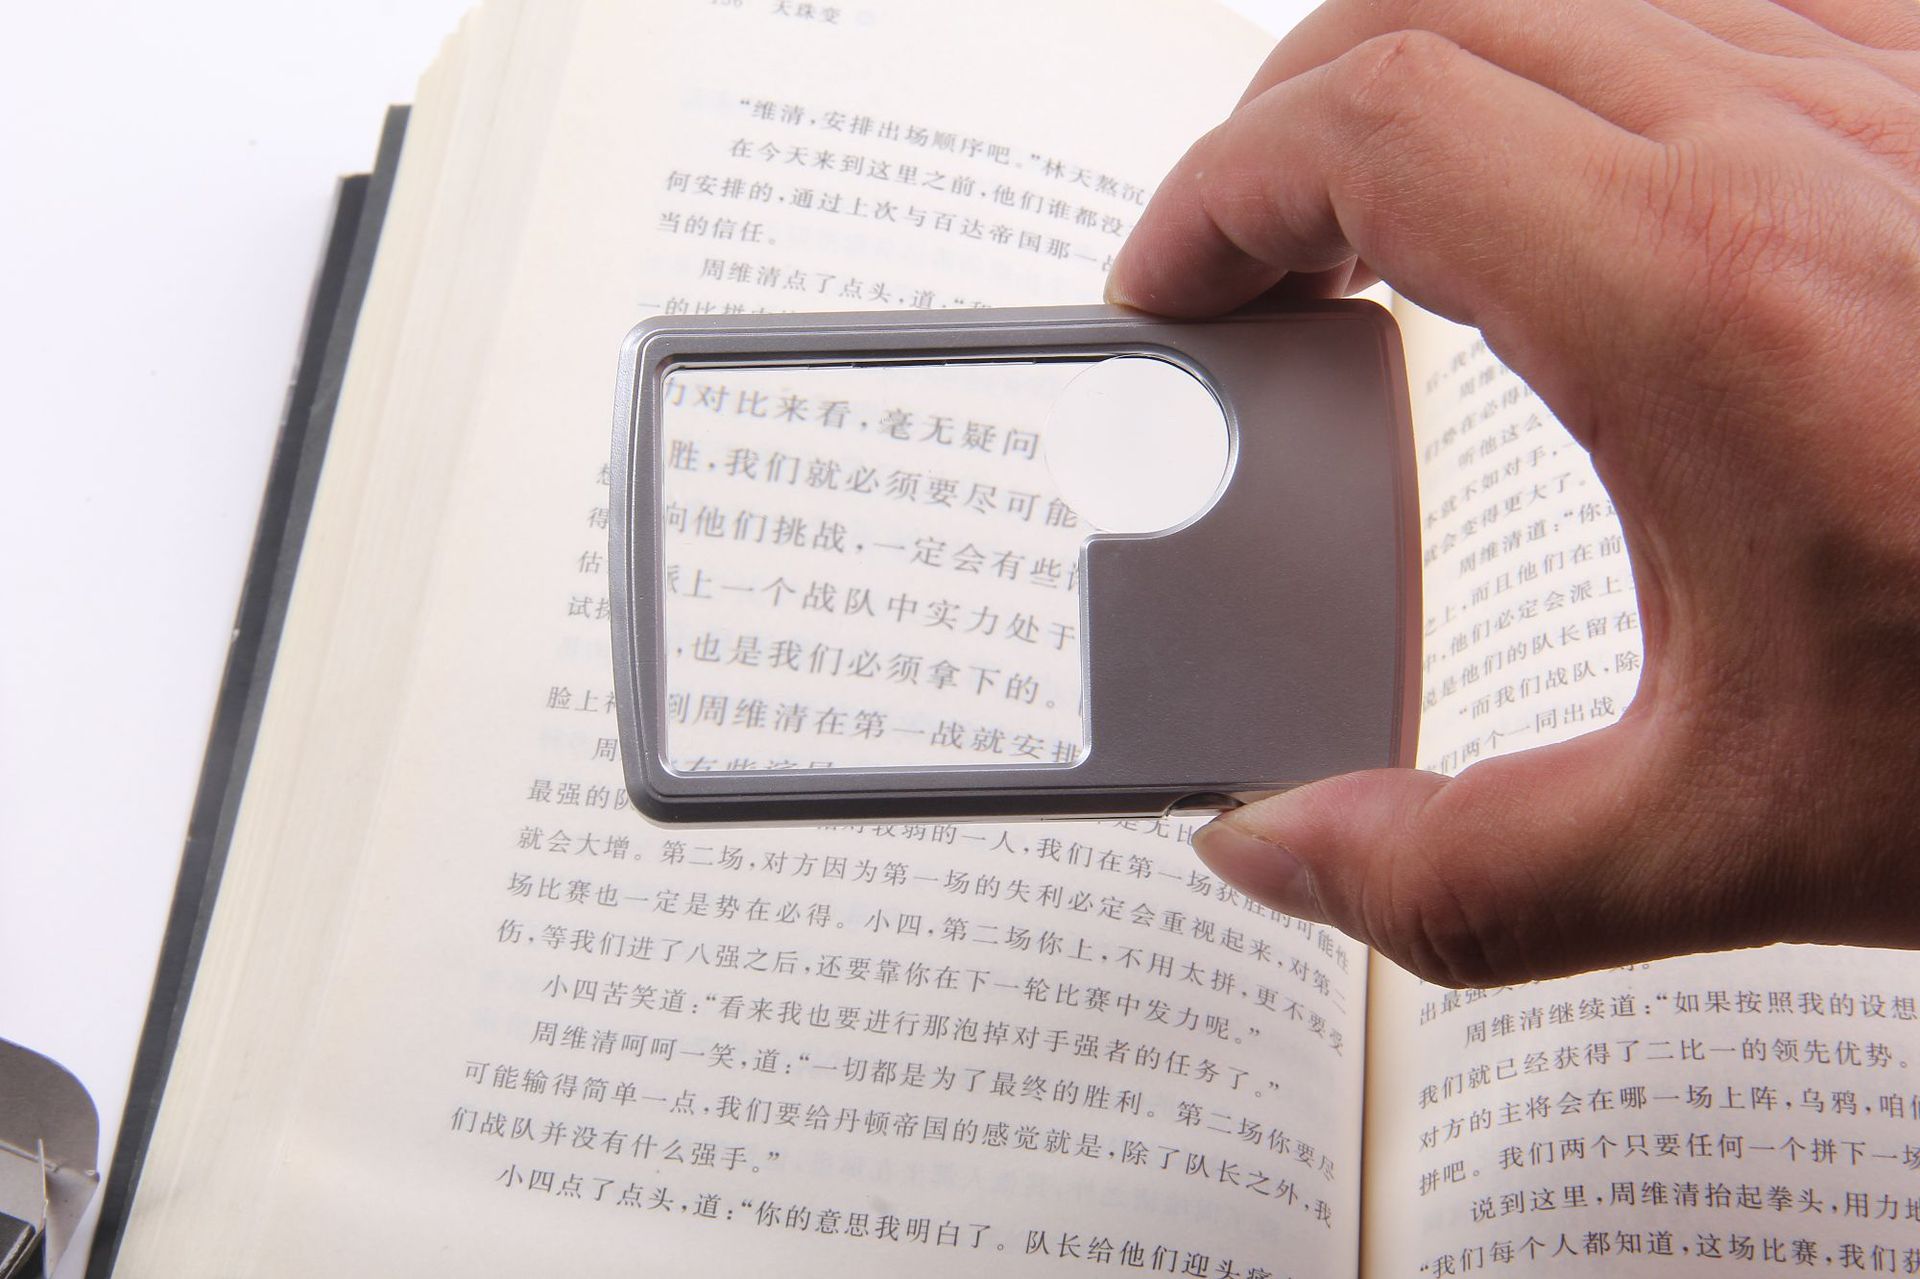 LED card type square portable acrylic lens reading Magnifier